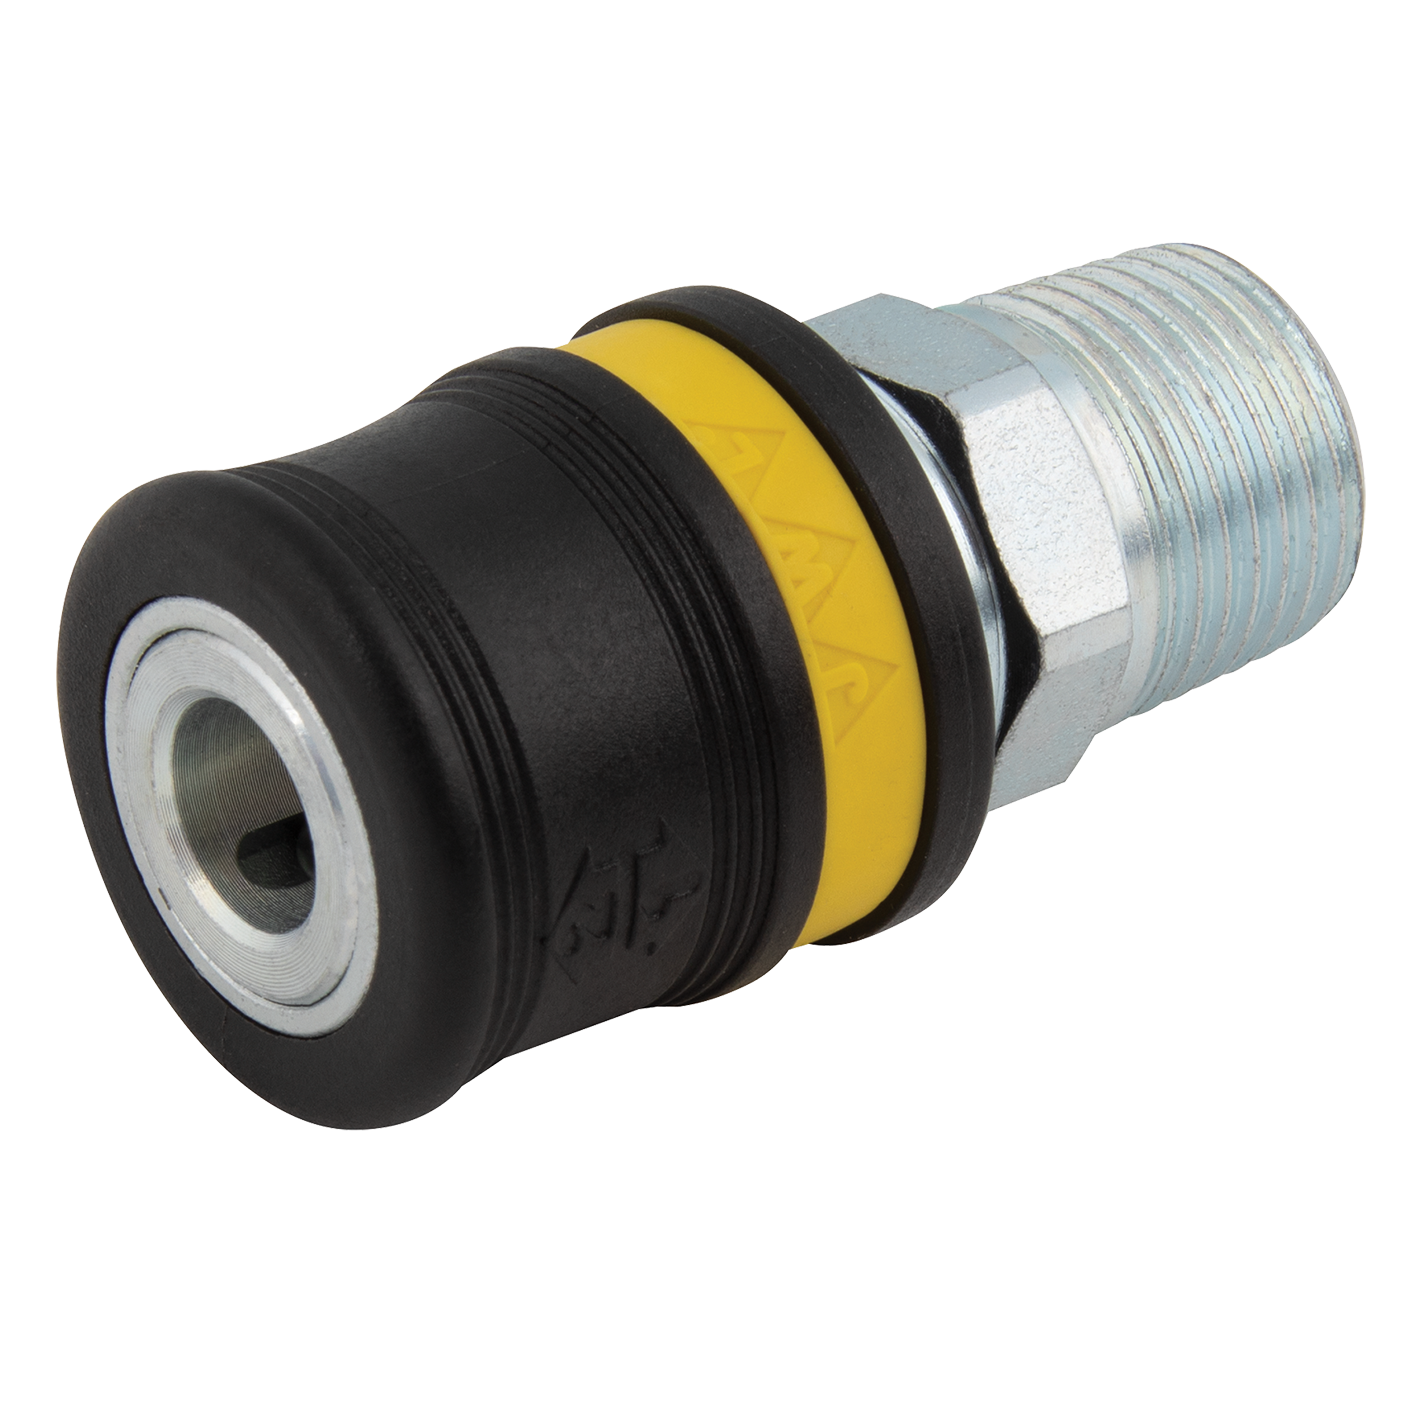 1/4" BSPT Male Safety Coupling